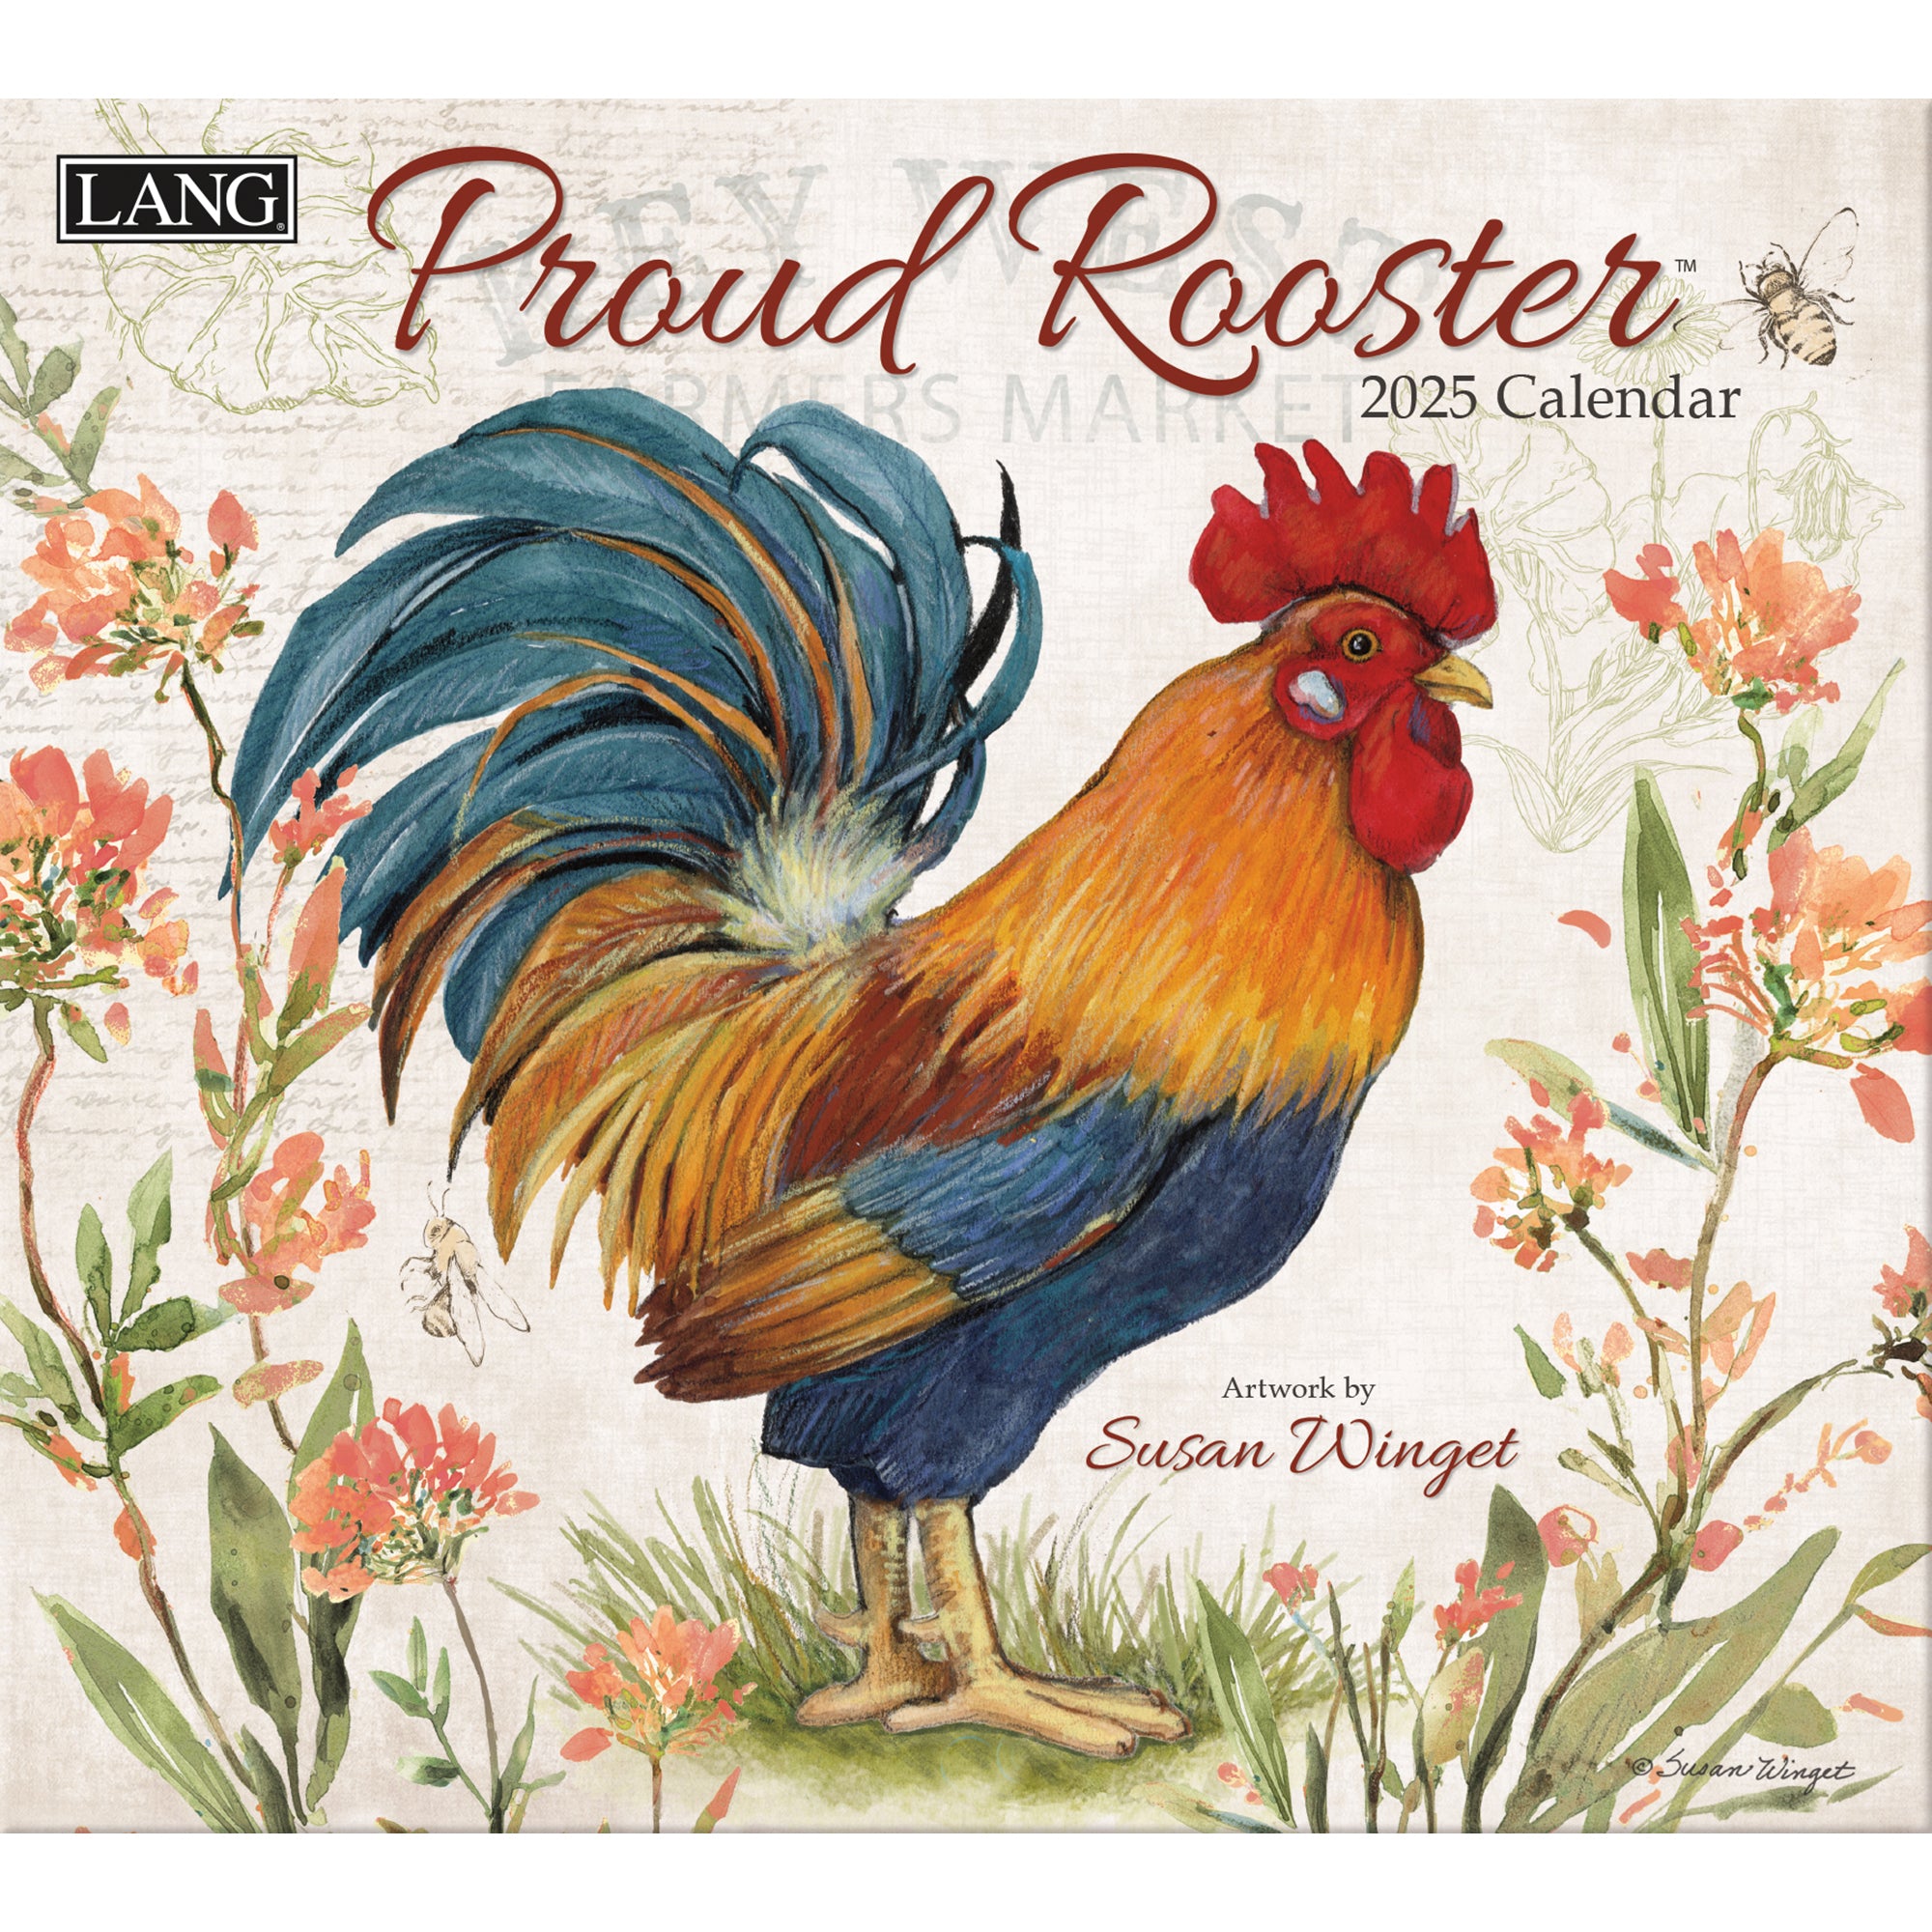 2025 Proud Rooster By Susan Winget - LANG Deluxe Wall Calendar